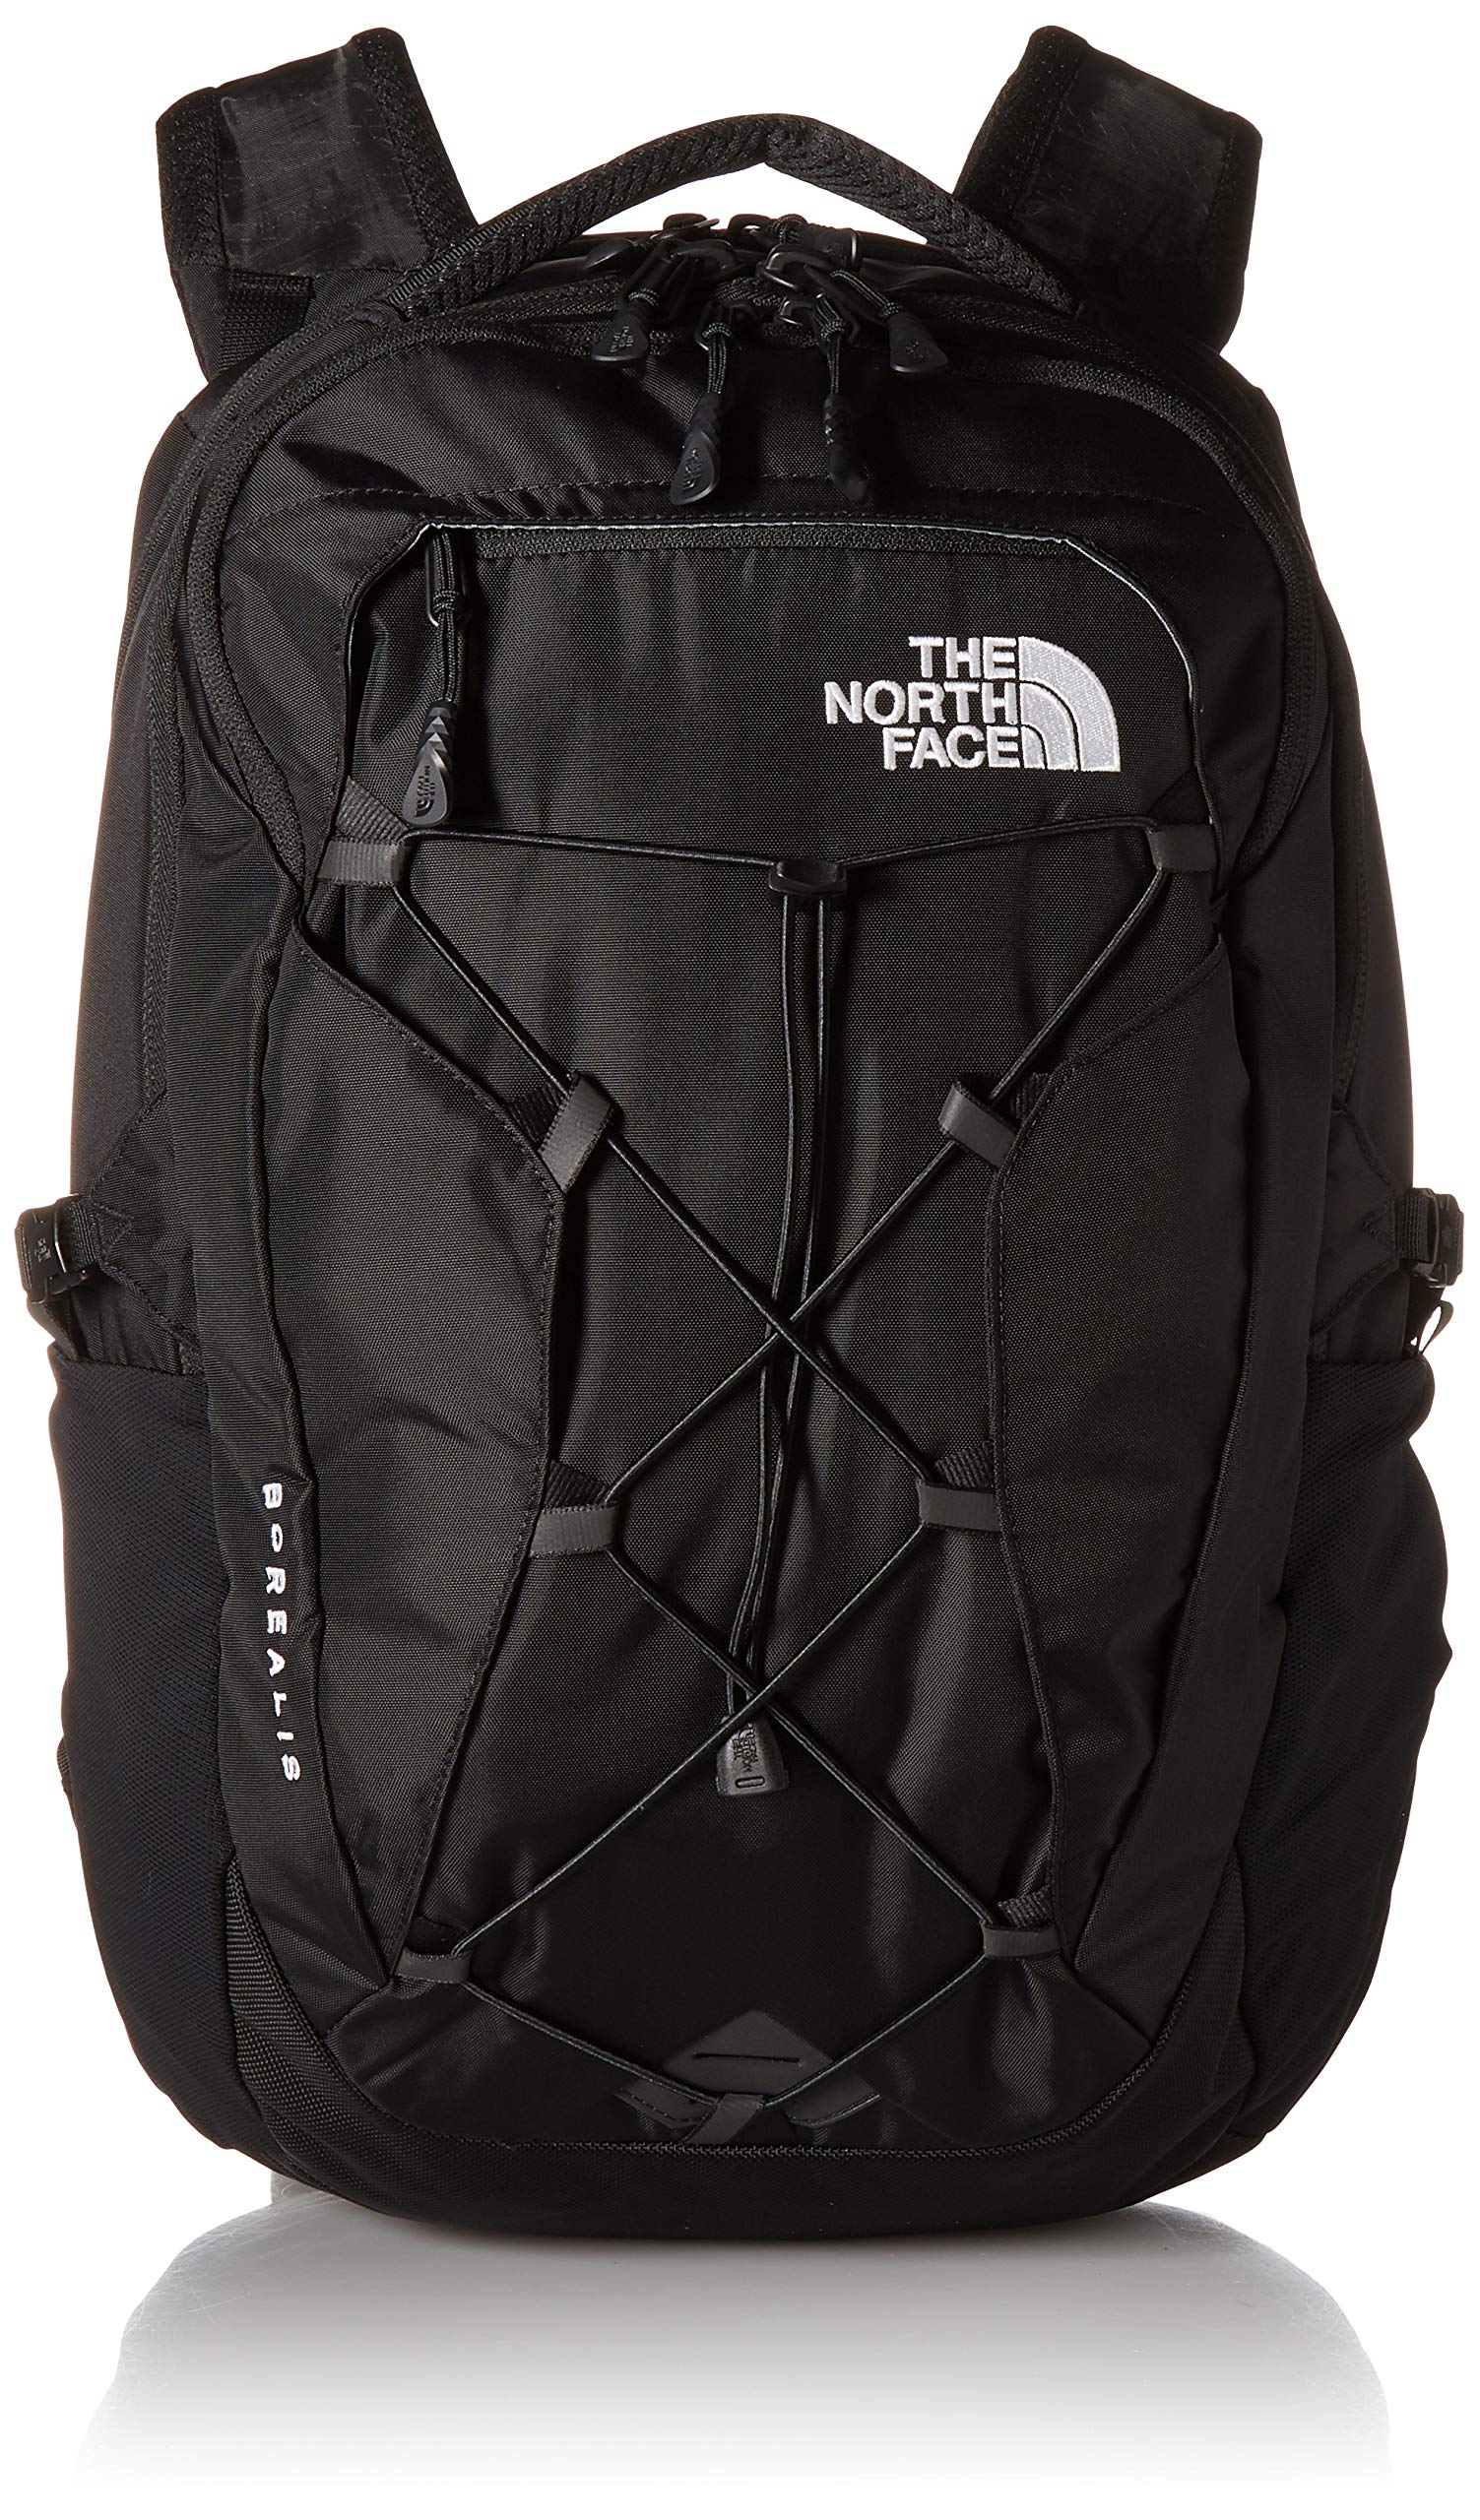 THE NORTH FACE Women's Borealis Commuter Laptop Backpack